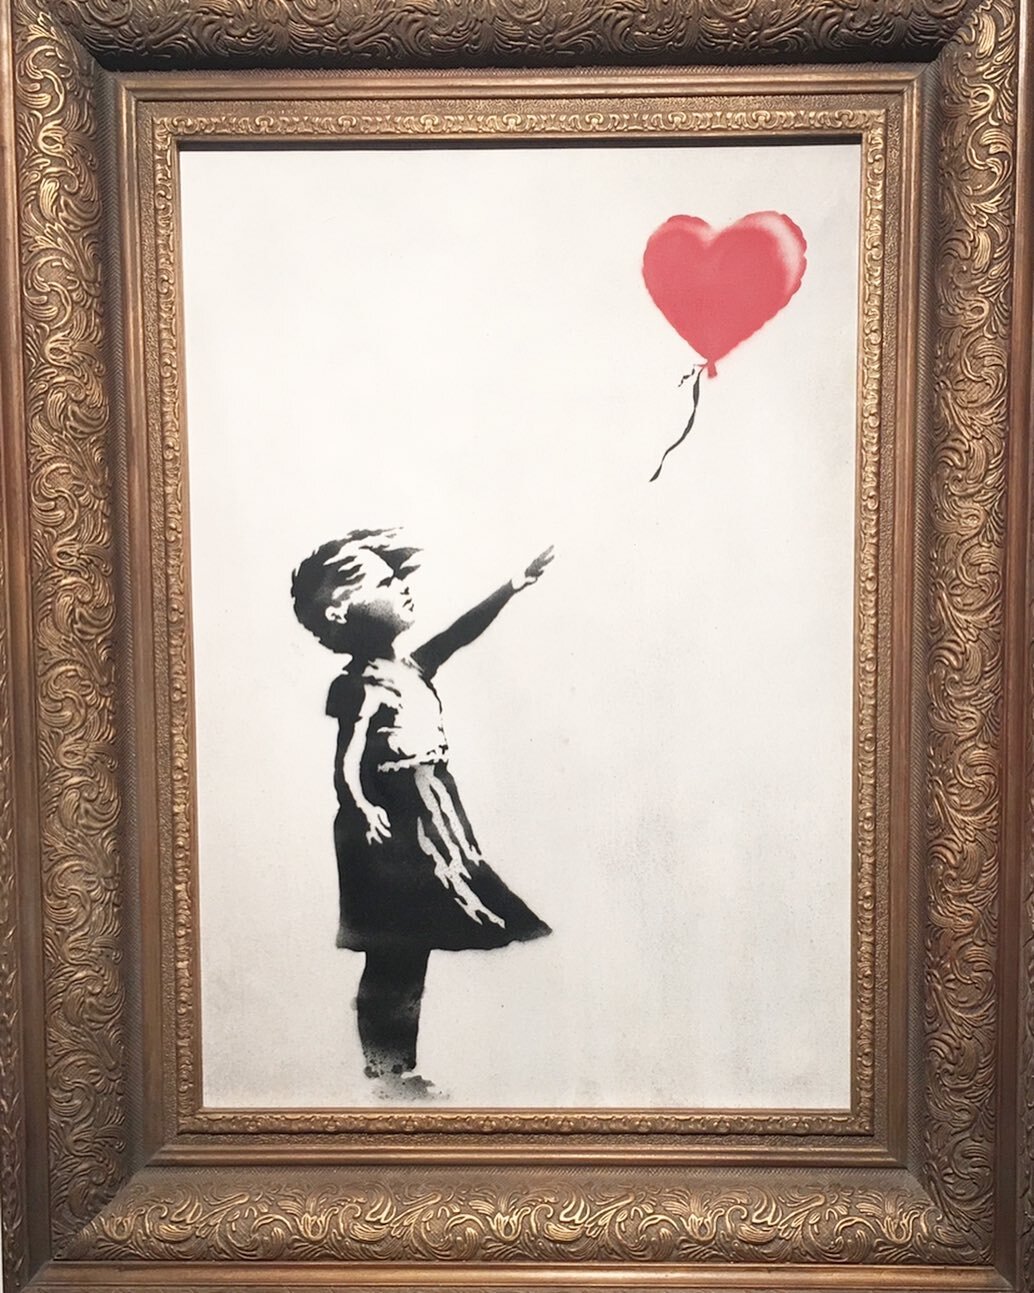 Currently working on a Banksy collection&hellip;I took this photo of the infamous &ldquo;Girl with Balloon&rdquo; just minutes before it shredded itself at Sotheby&rsquo;s London in 2018&hellip;

#sothebyslondon #famousart
#bansky #banskyart #banksya